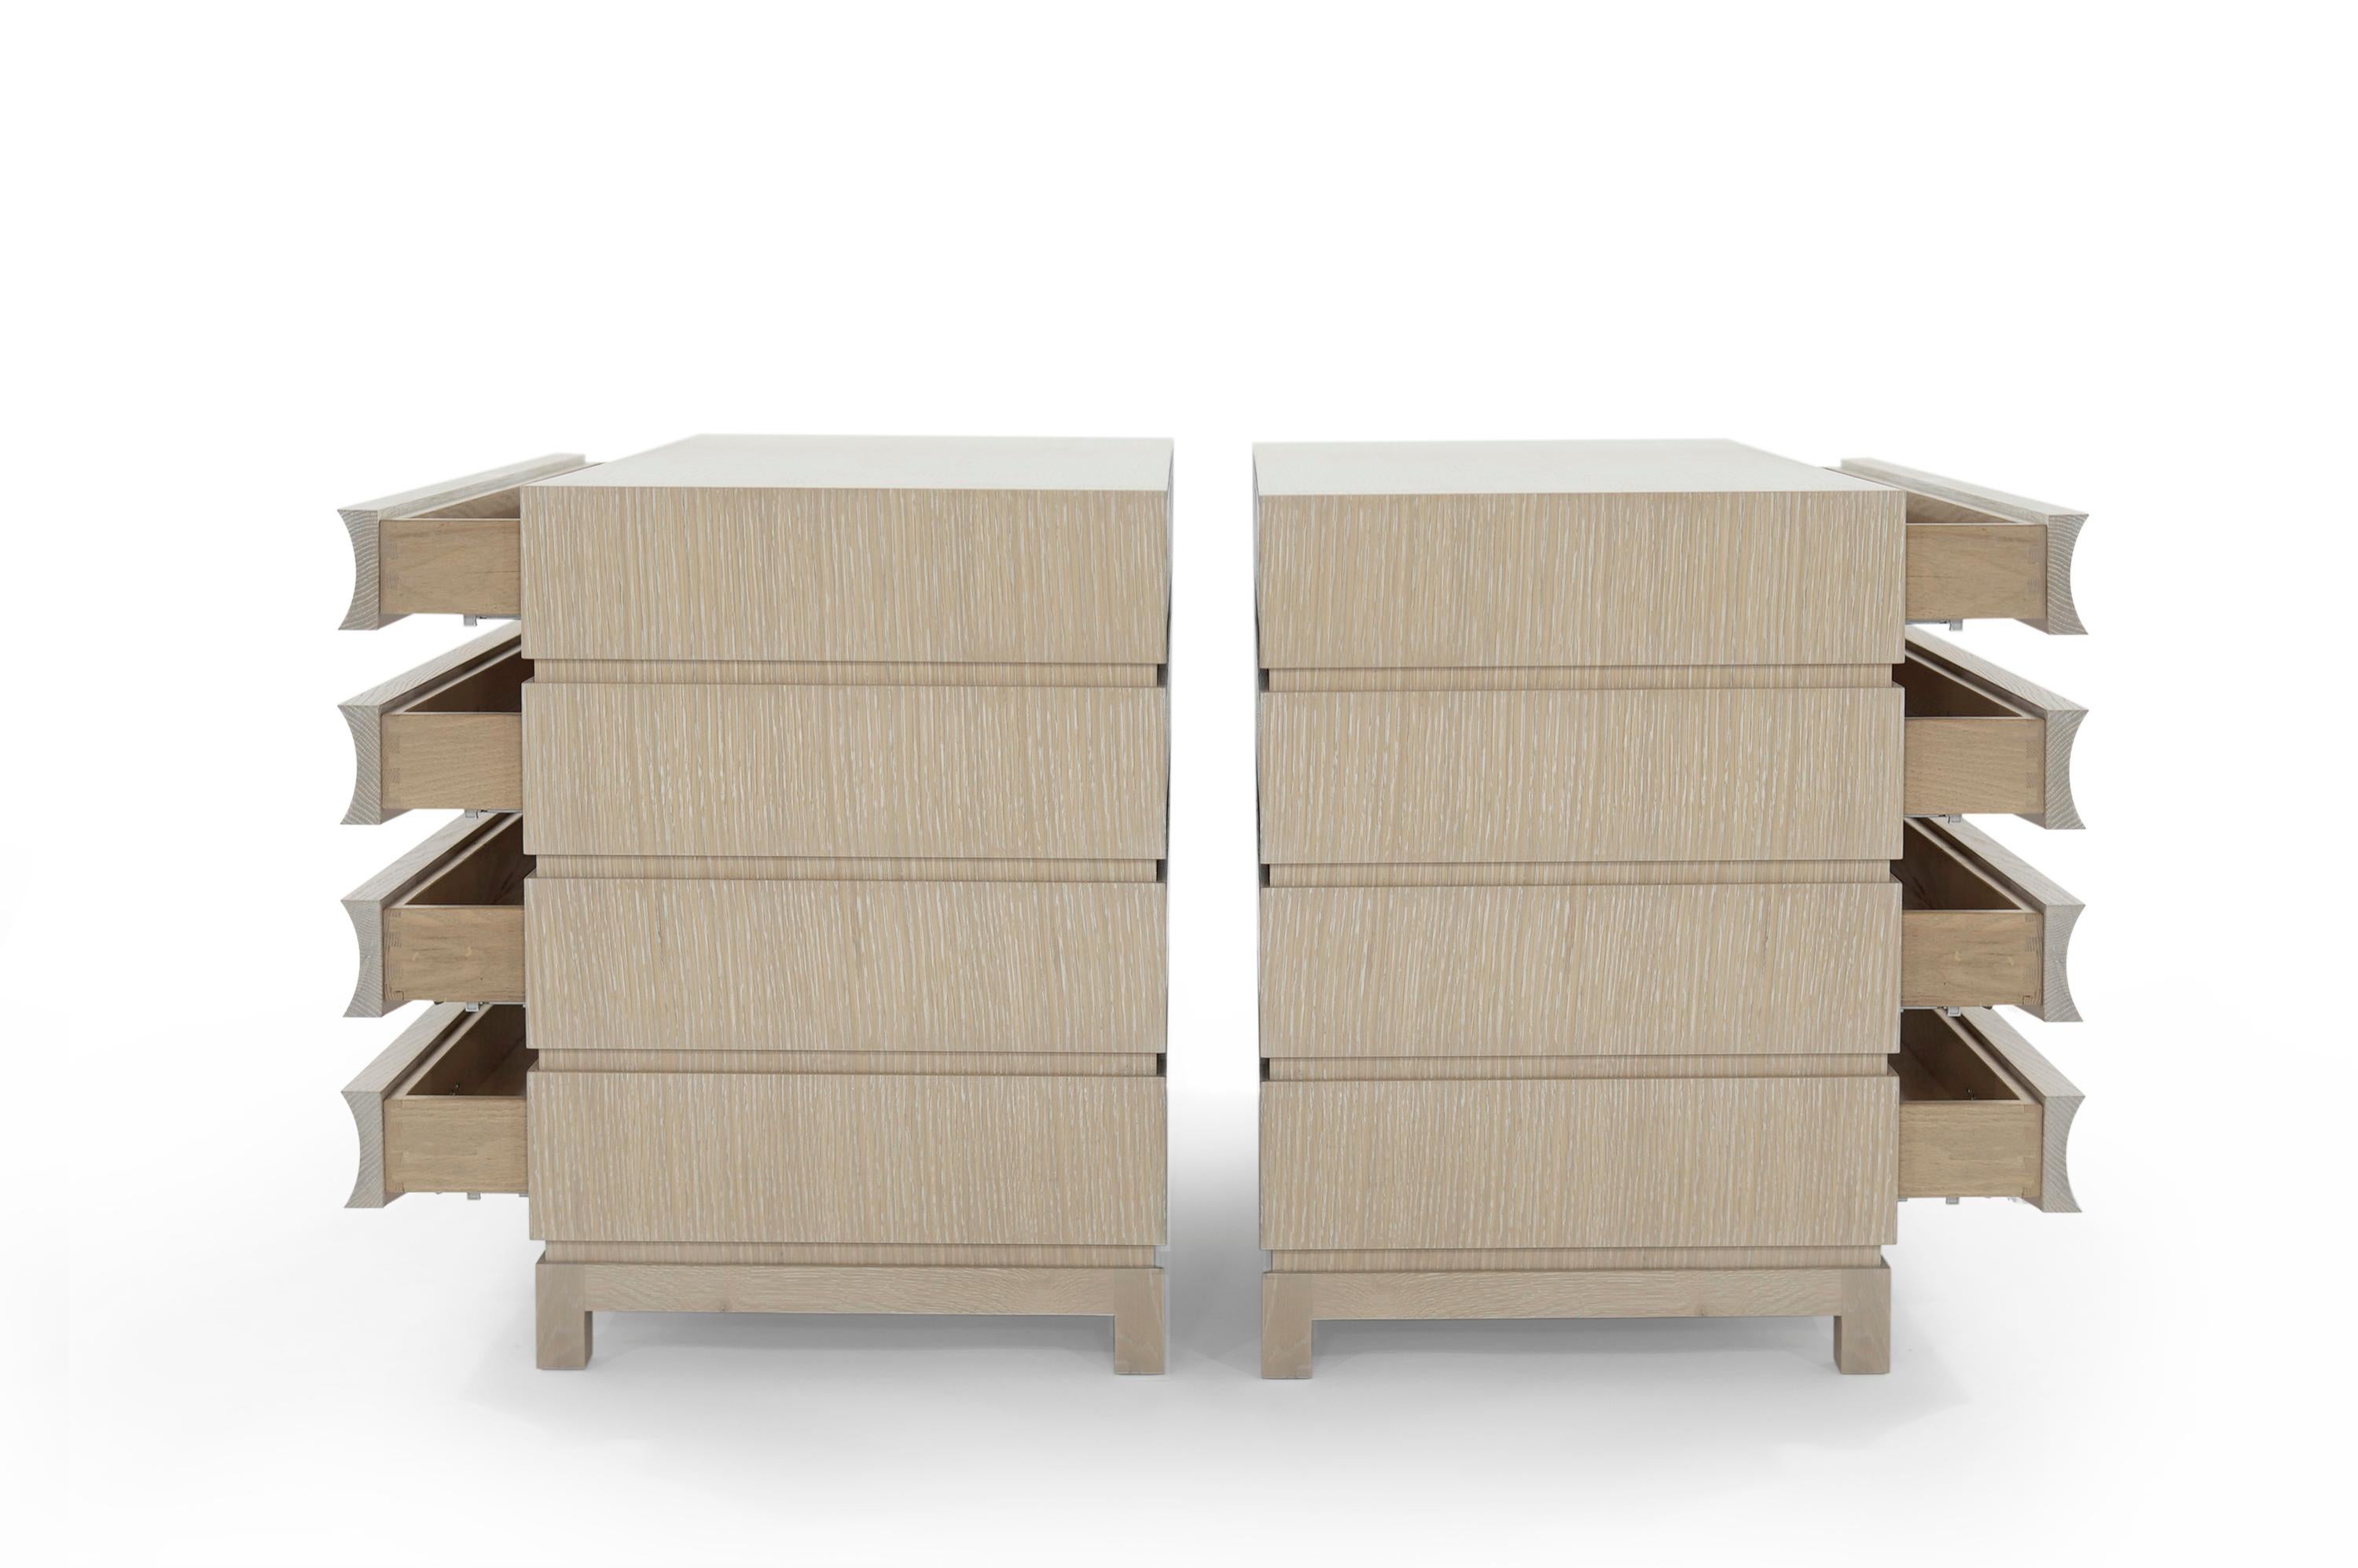 American Stacked Dressers in Limed Oak For Sale